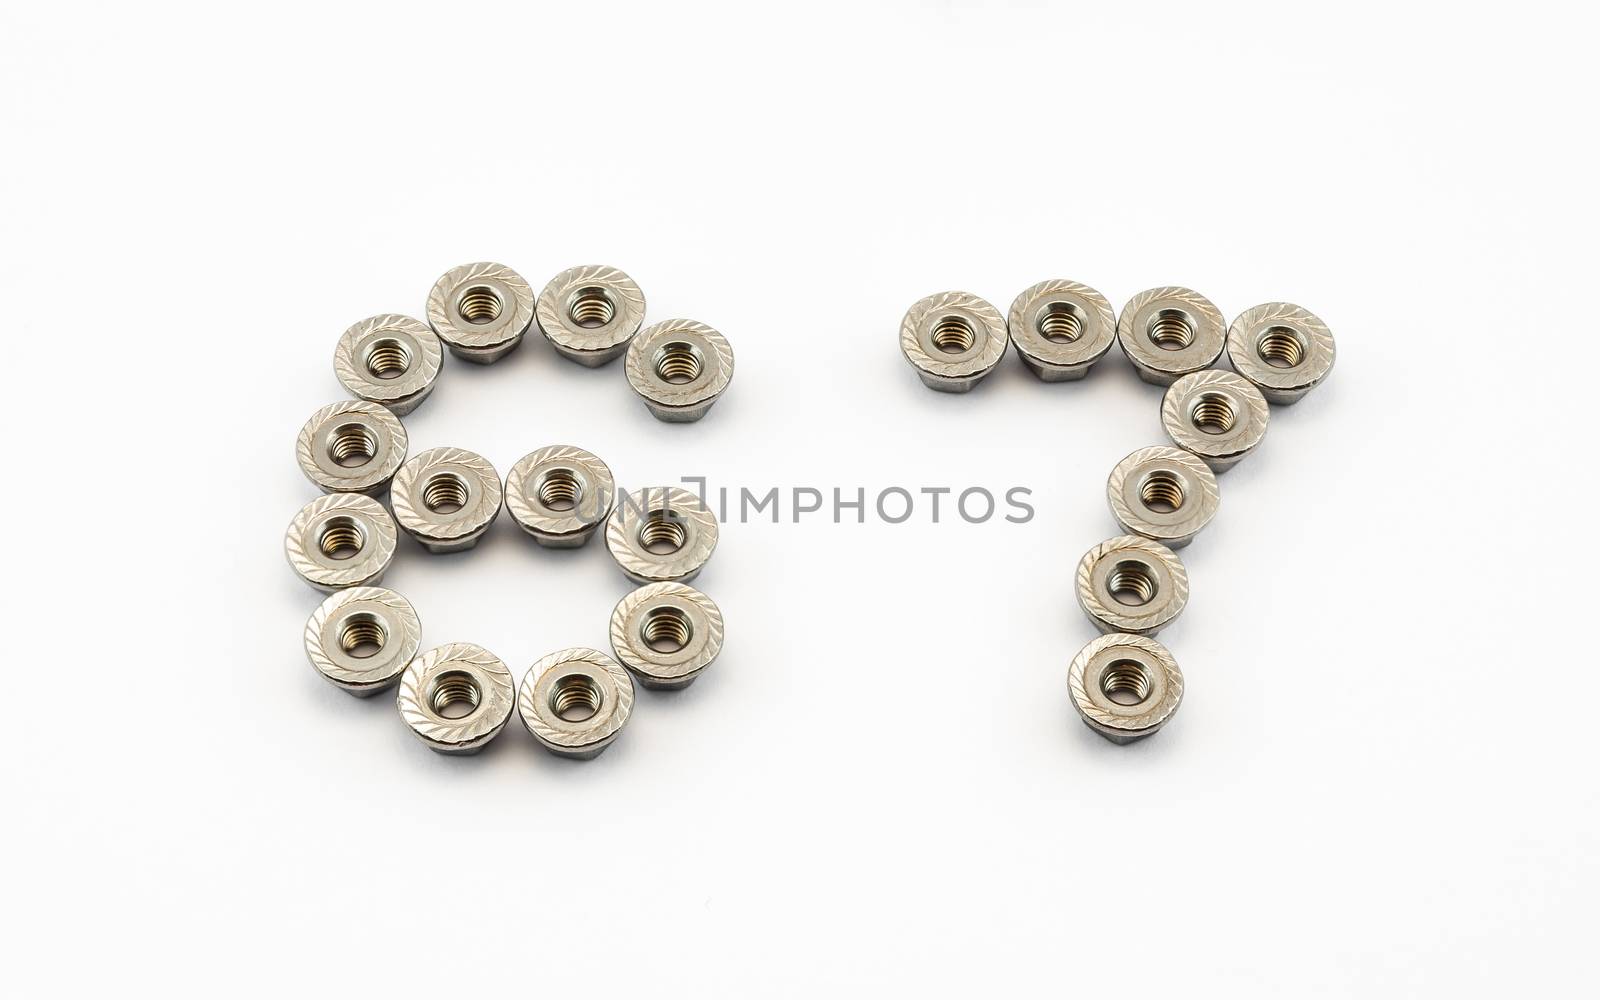 6 and 7 Number, Created by Stainless Steel Hex Flange Nuts.